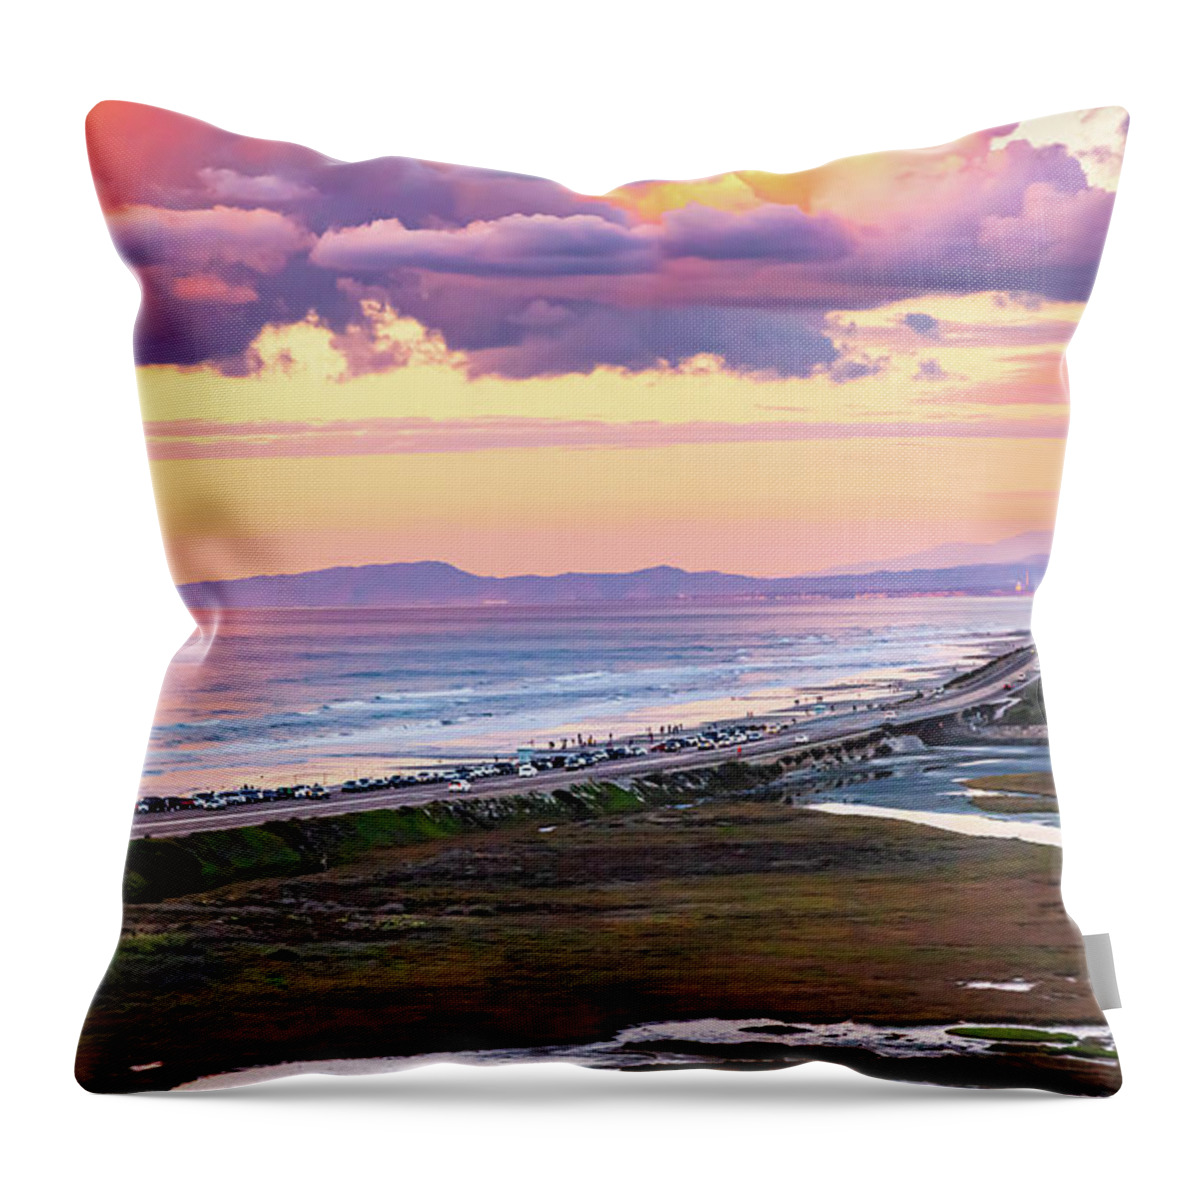 Sunset Throw Pillow featuring the photograph Pastel Sunset by Ryan Huebel